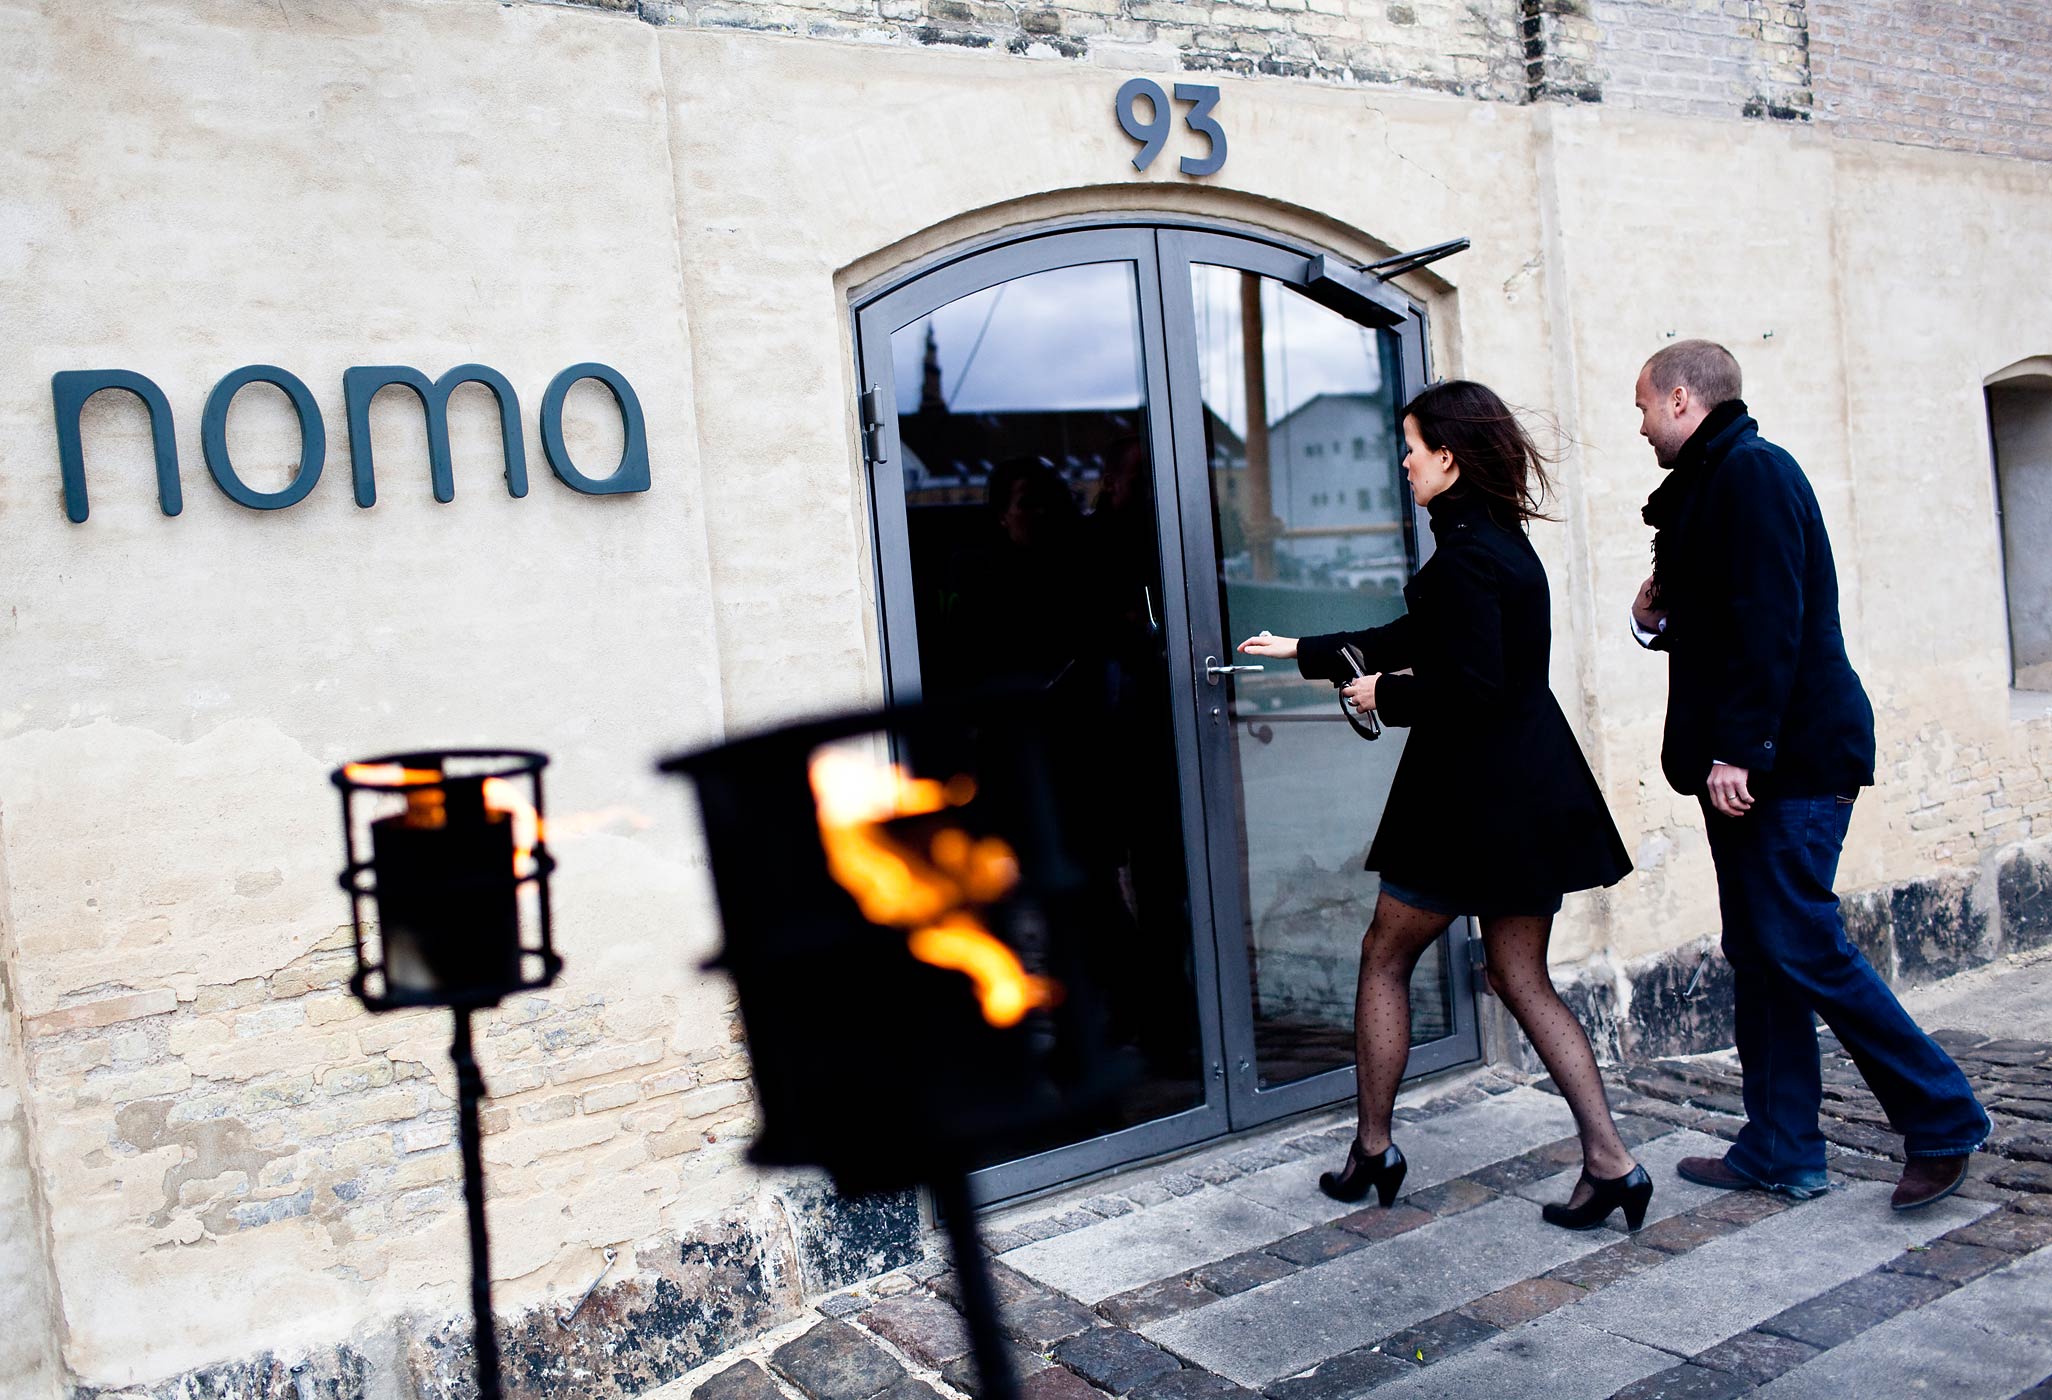 People enter the Noma restaurant in Cope